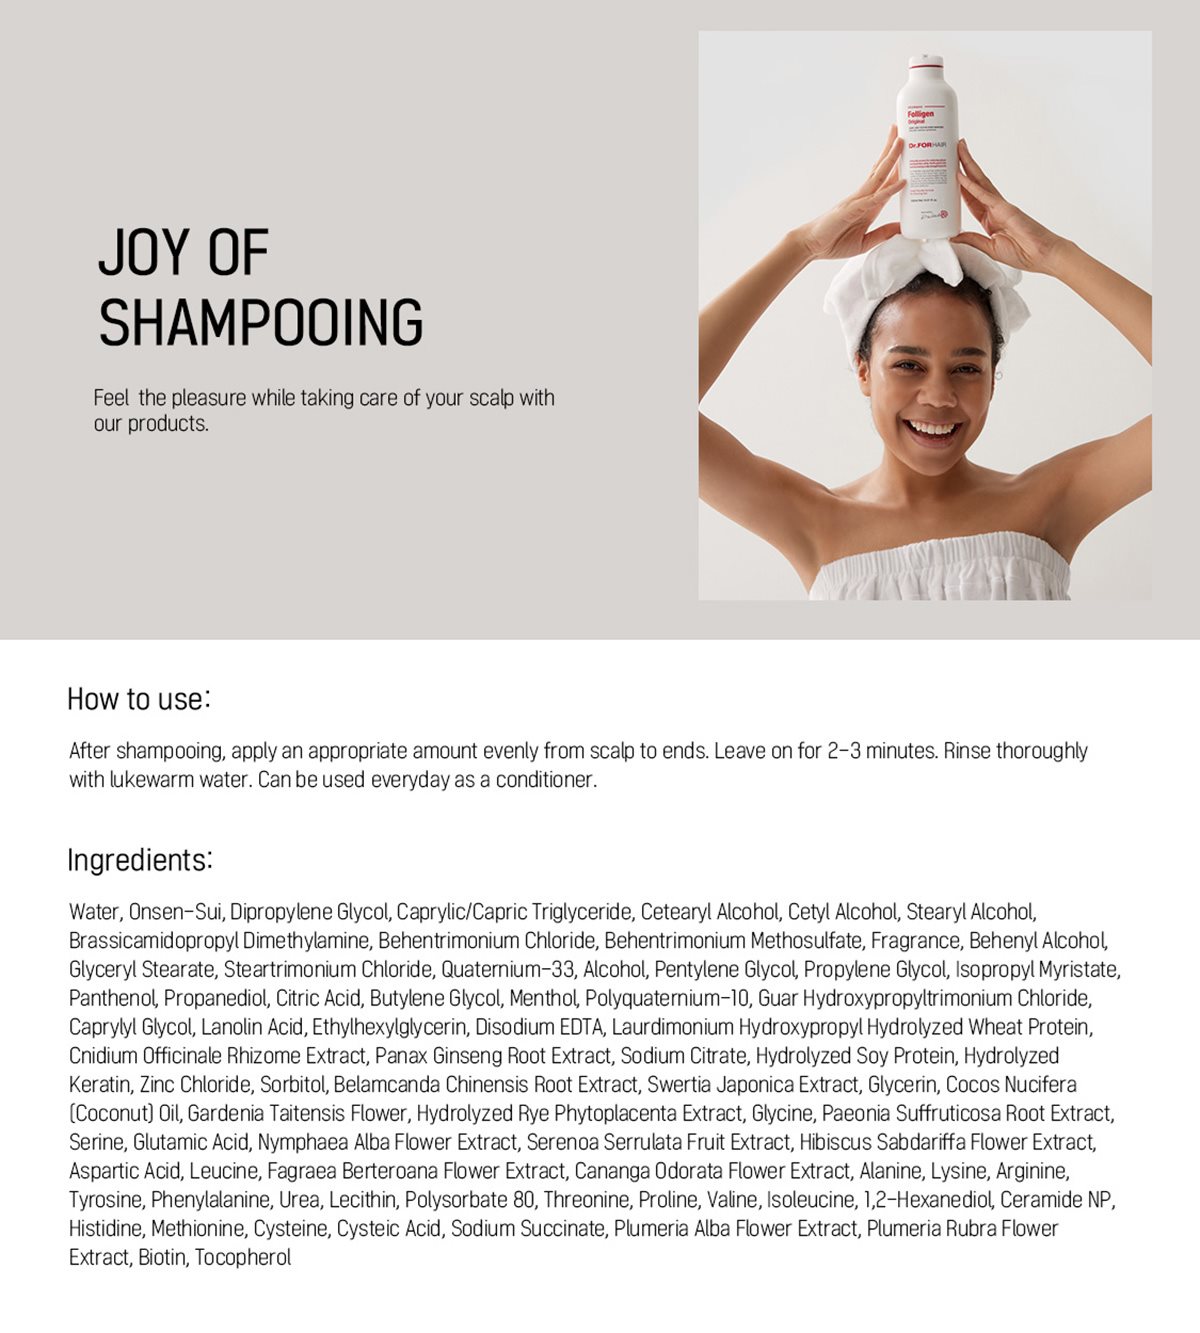 A photo of a model with her hair and body wrapped in clean white towels looking happy and joyful holding up a bottle of the Dr. for Hair Folligen Original Shampoo, looking like she is about to or just finish taking a shower and washing her hair.